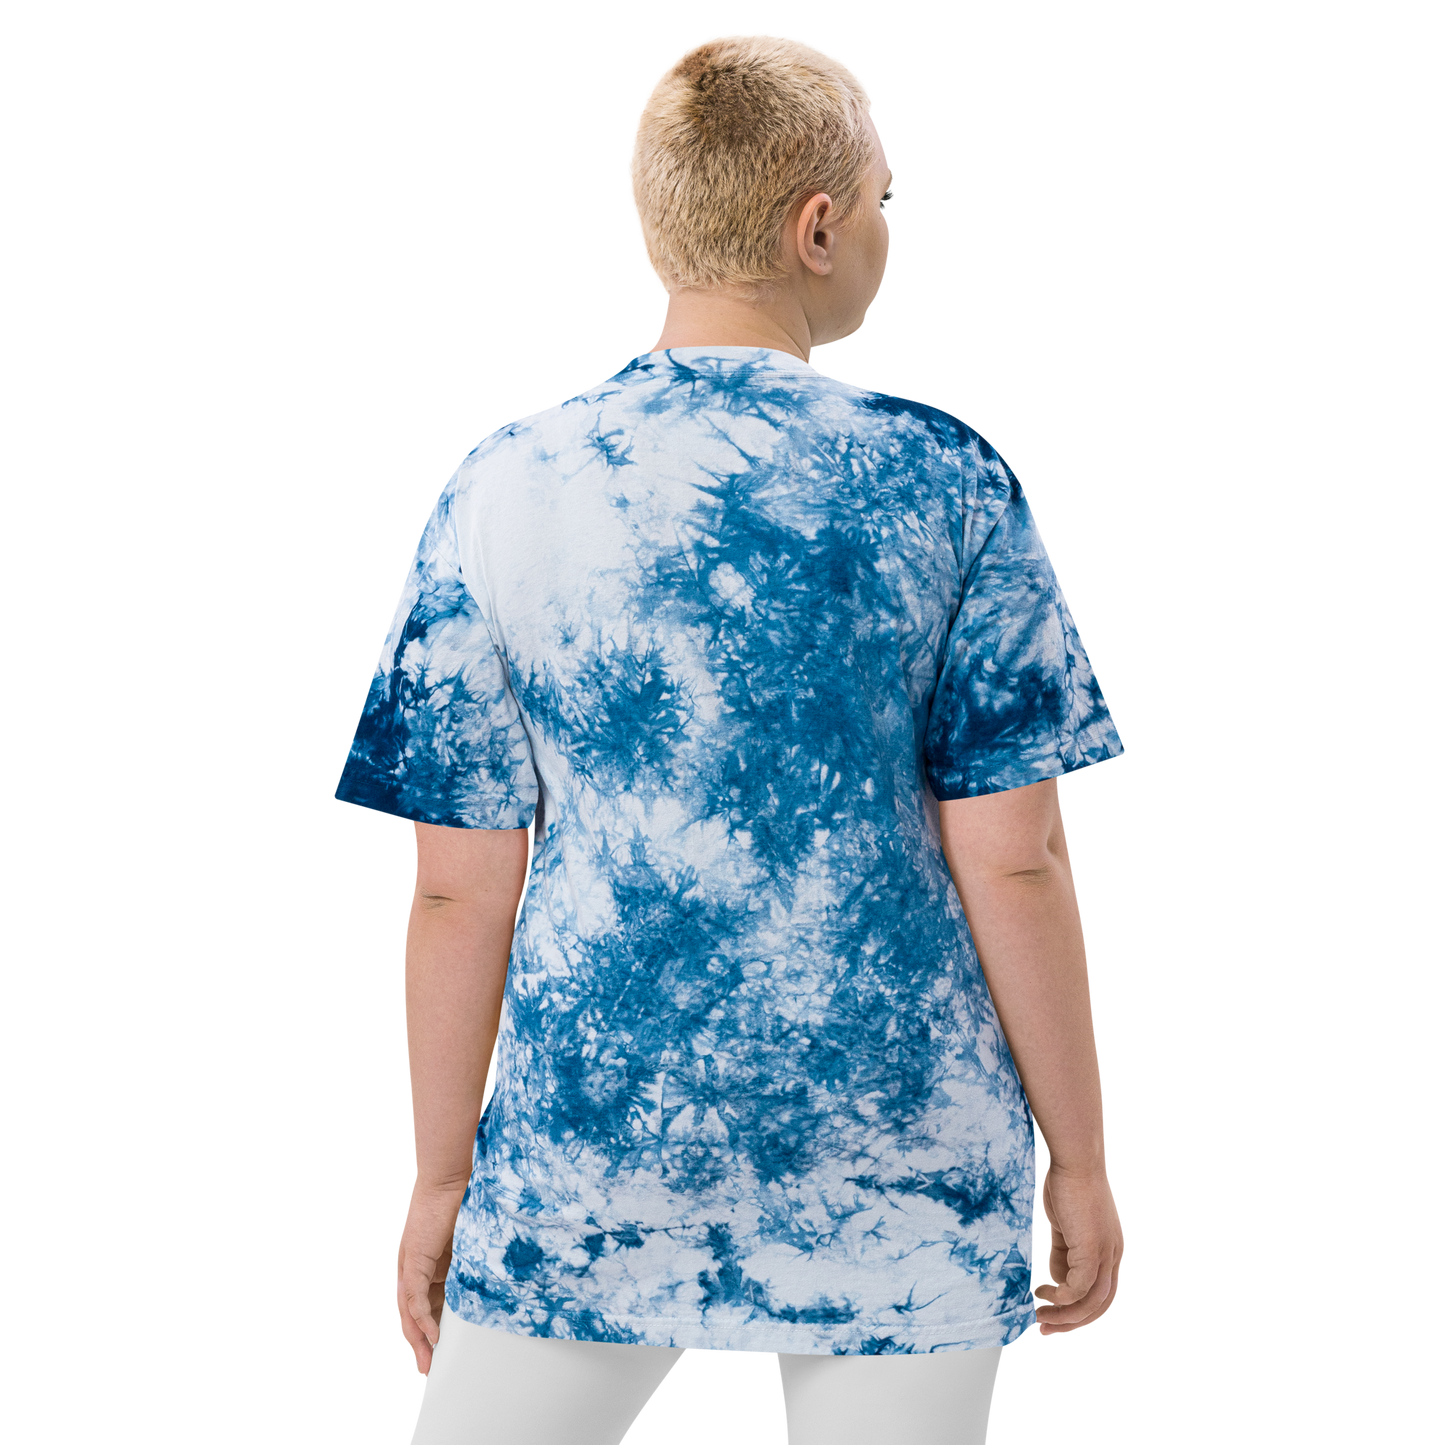 YHM Designs - YFB Iqaluit Oversized Tie-Dye T-Shirt - Crossed-X Design with Airport Code and Vintage Propliner - White Embroidery - Image 09